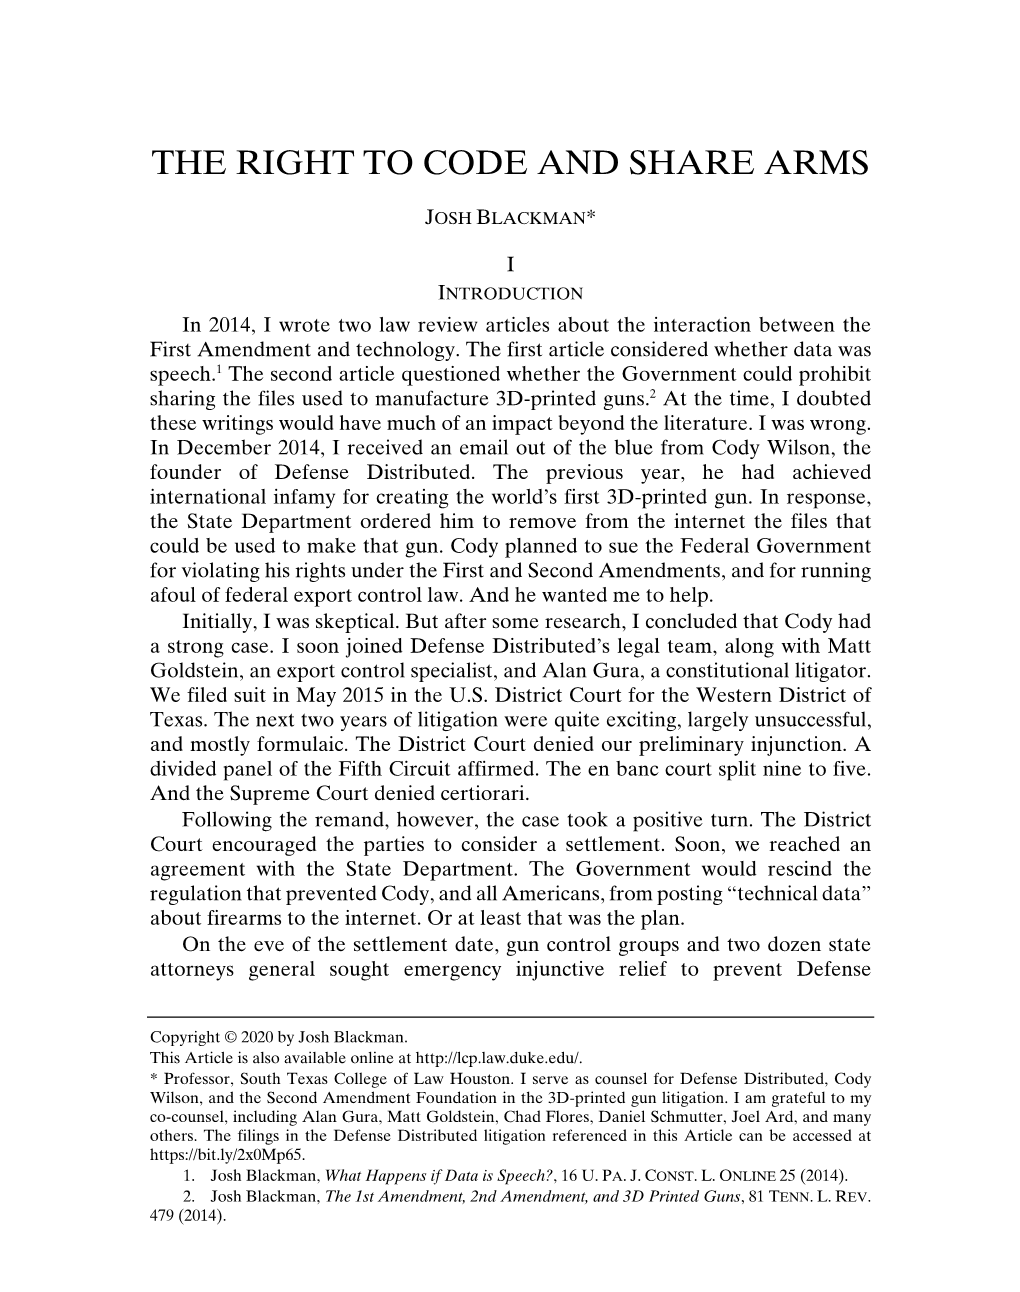 The Right to Code and Share Arms